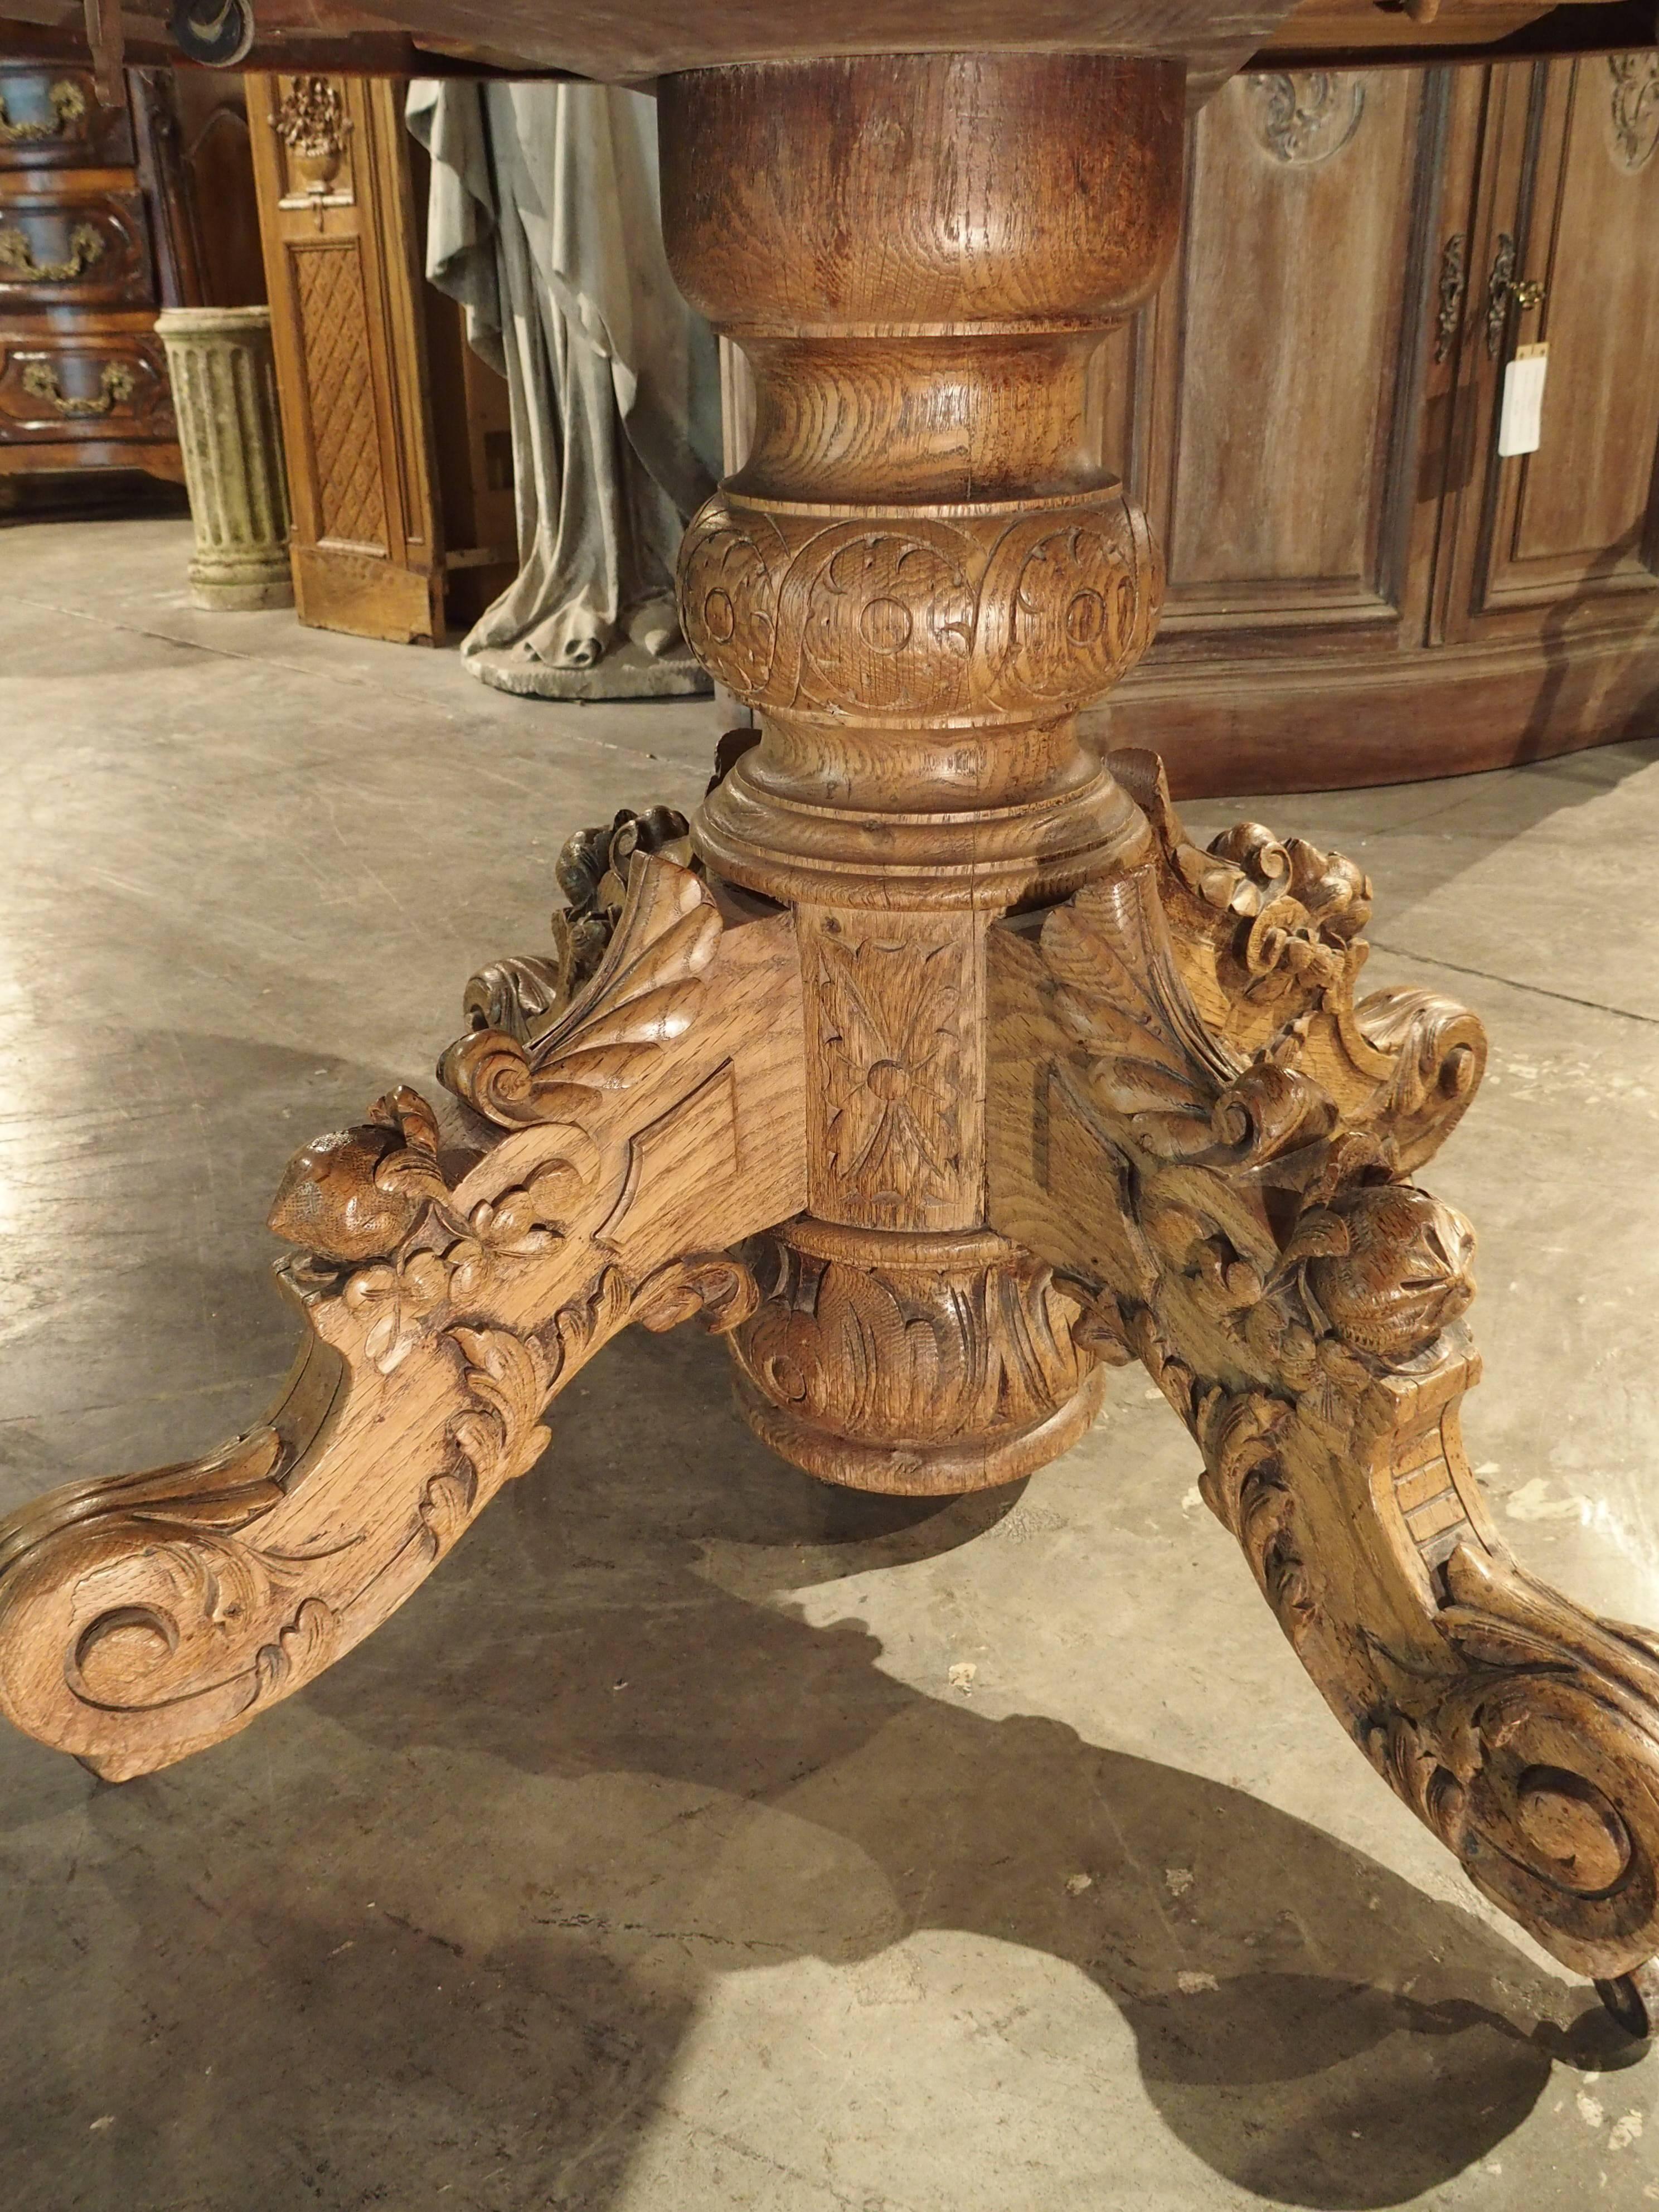 This French oval table has been constructed of European oak. It has a shaped and carved round center post with four richly carved legs on rollers. The carving is exquisite and includes acanthus leaves, fruit, guilloche and more. At one point in